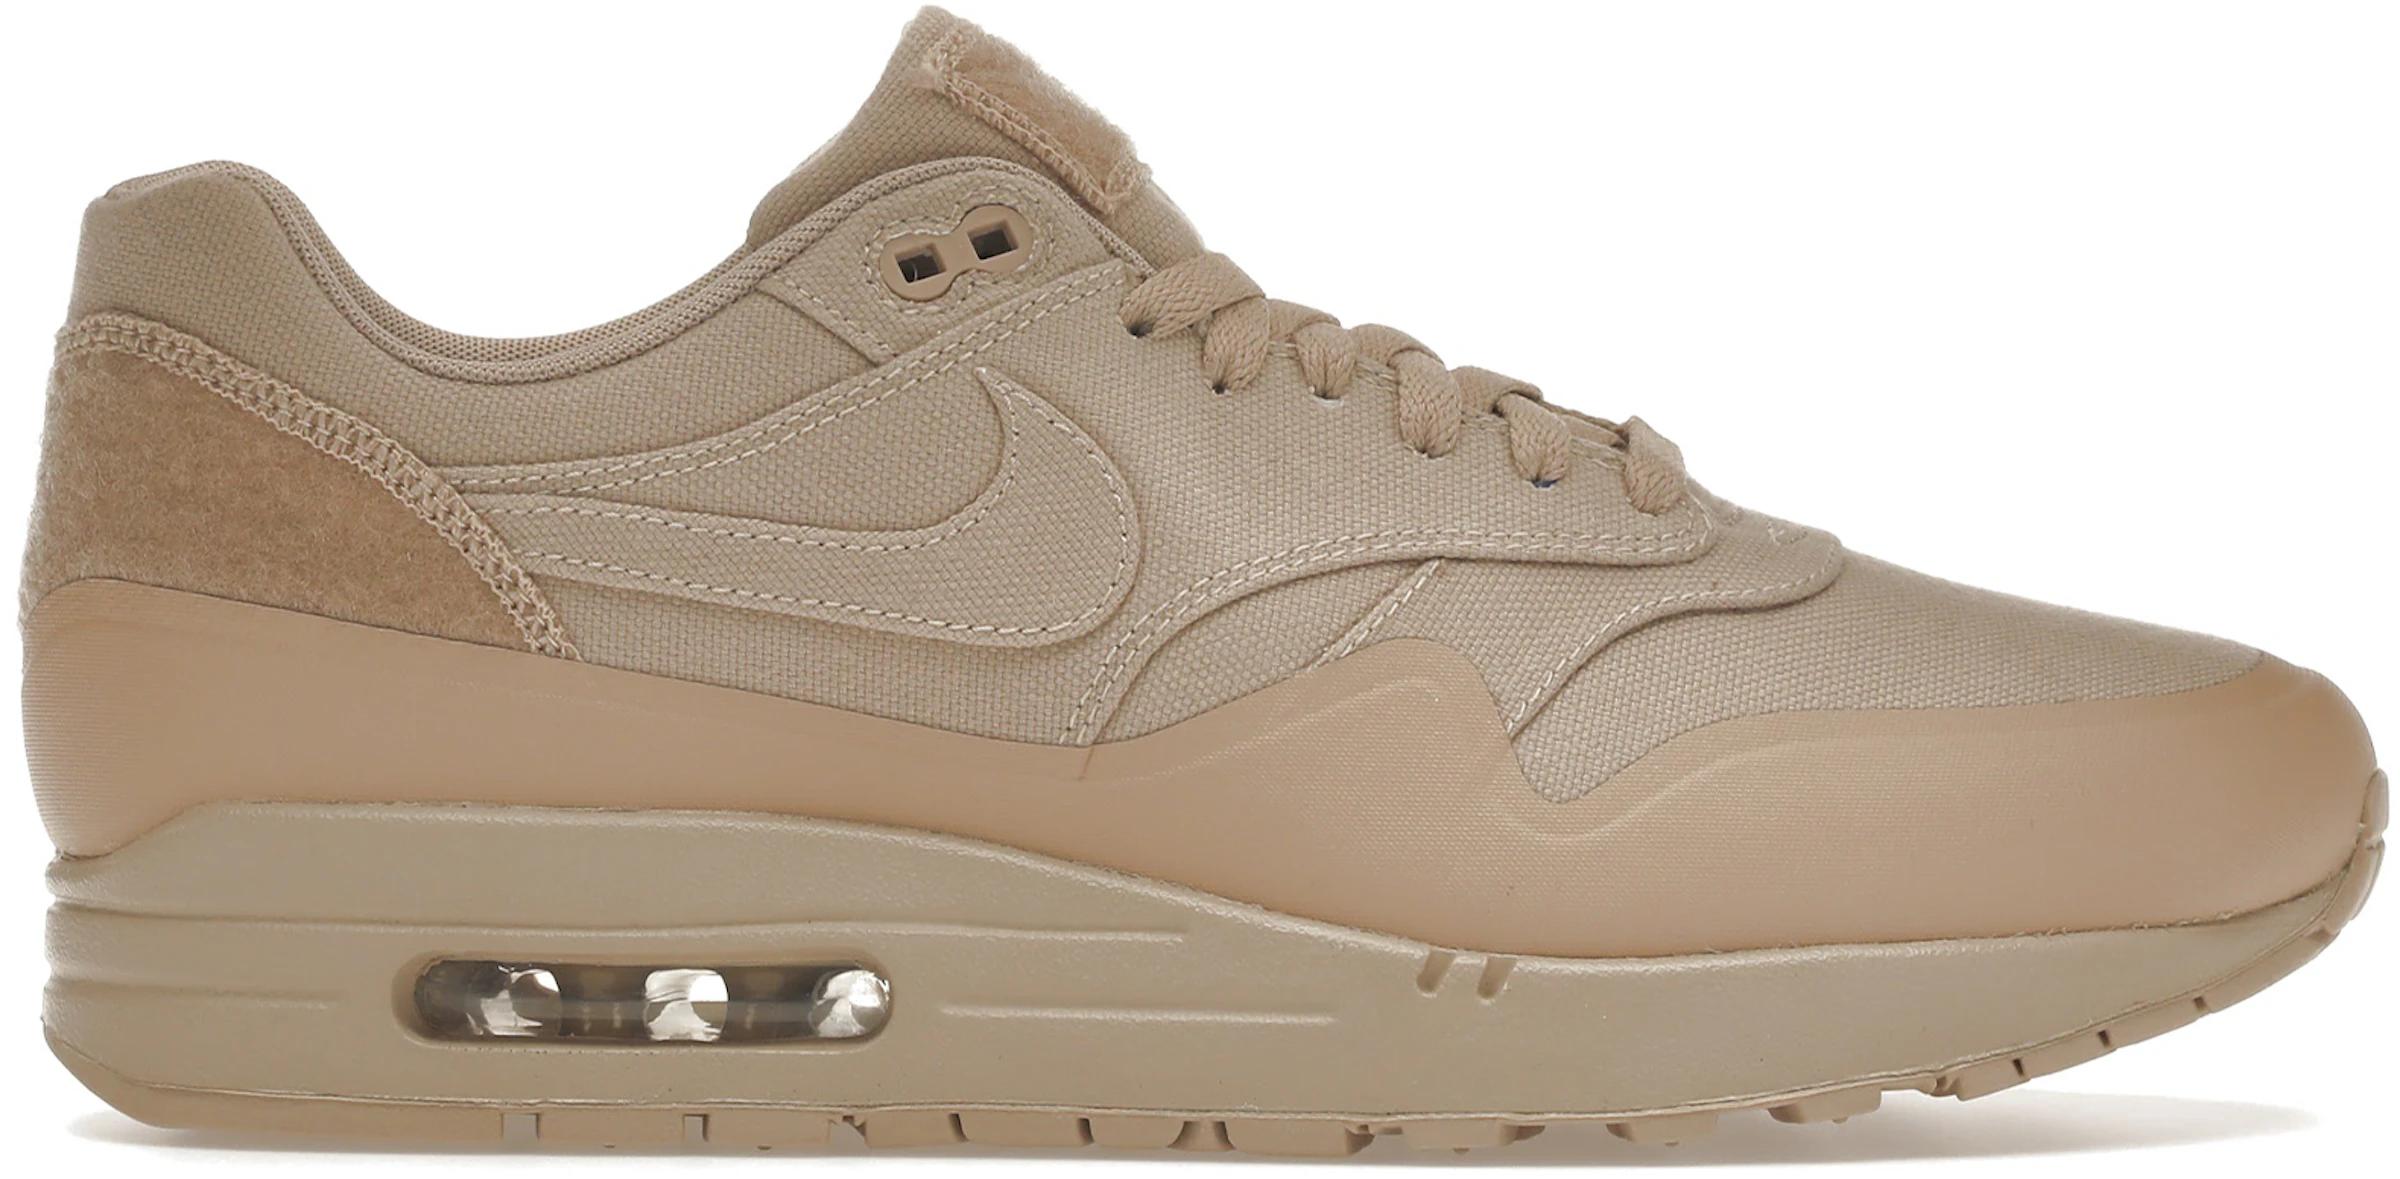 Nike Max Patch Sand 704901-200 - ES